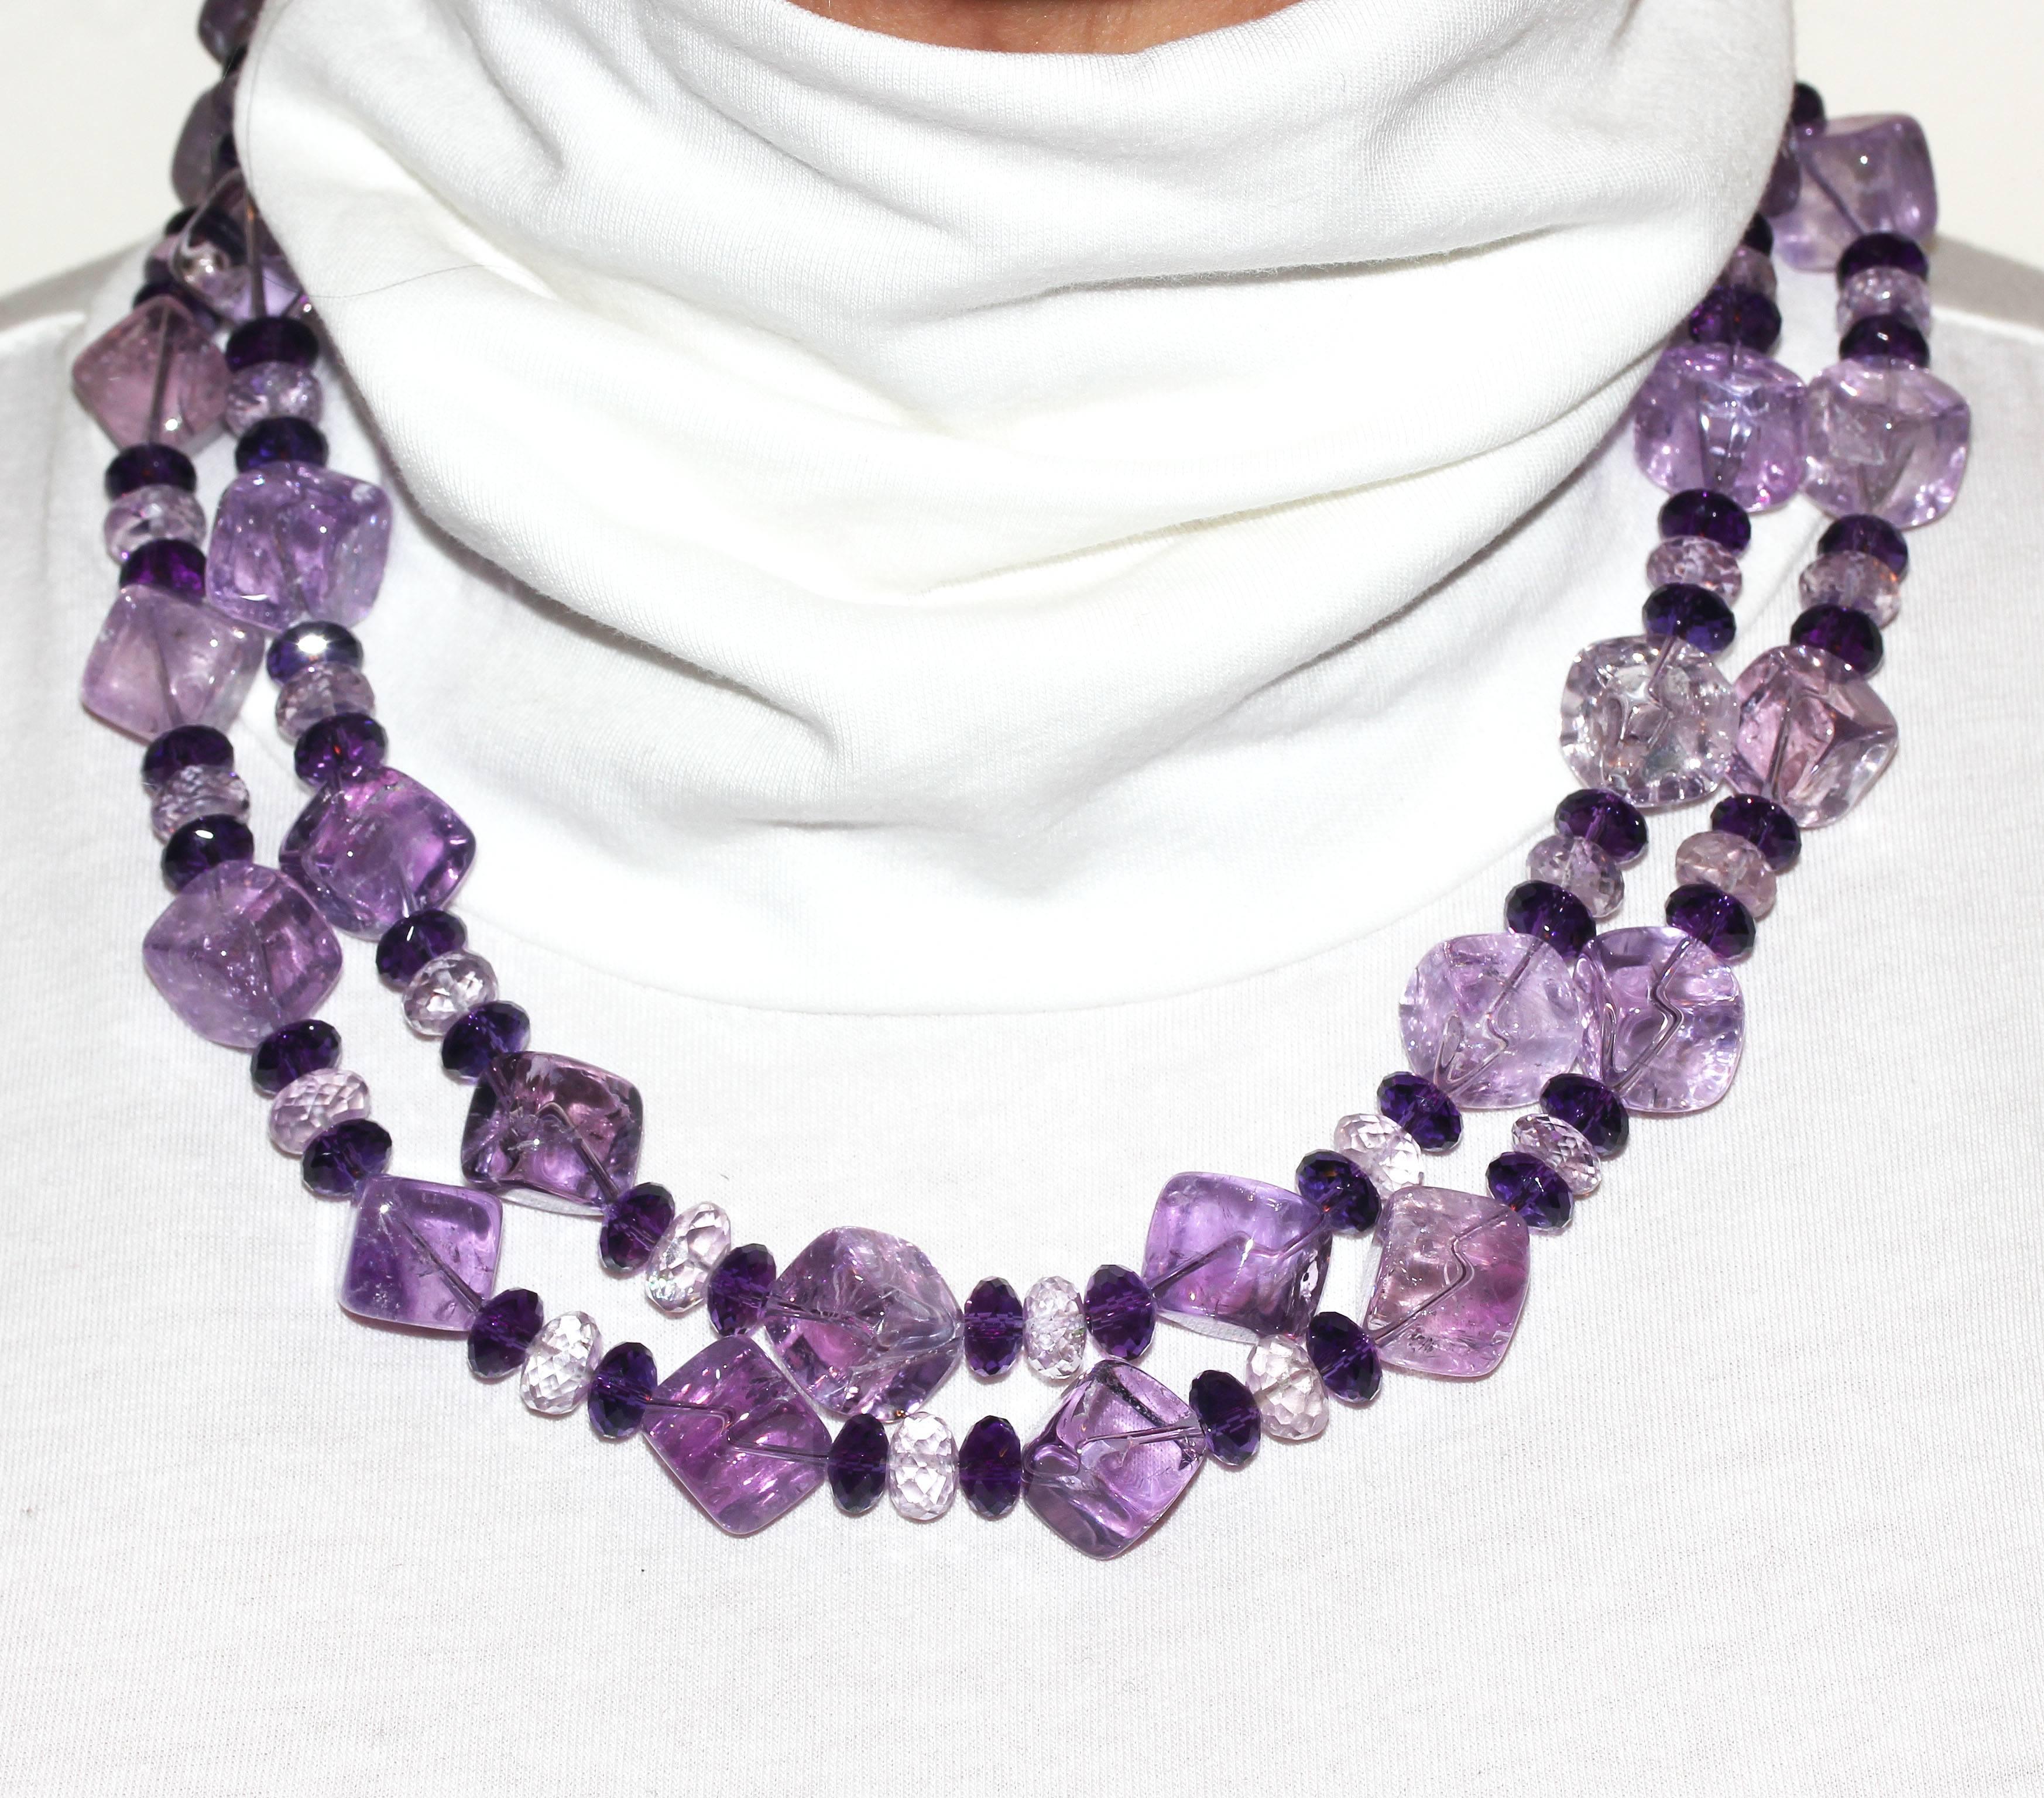 Women's AJD Stunning Glittering Double Strand Amethysts & Rose of France Necklace